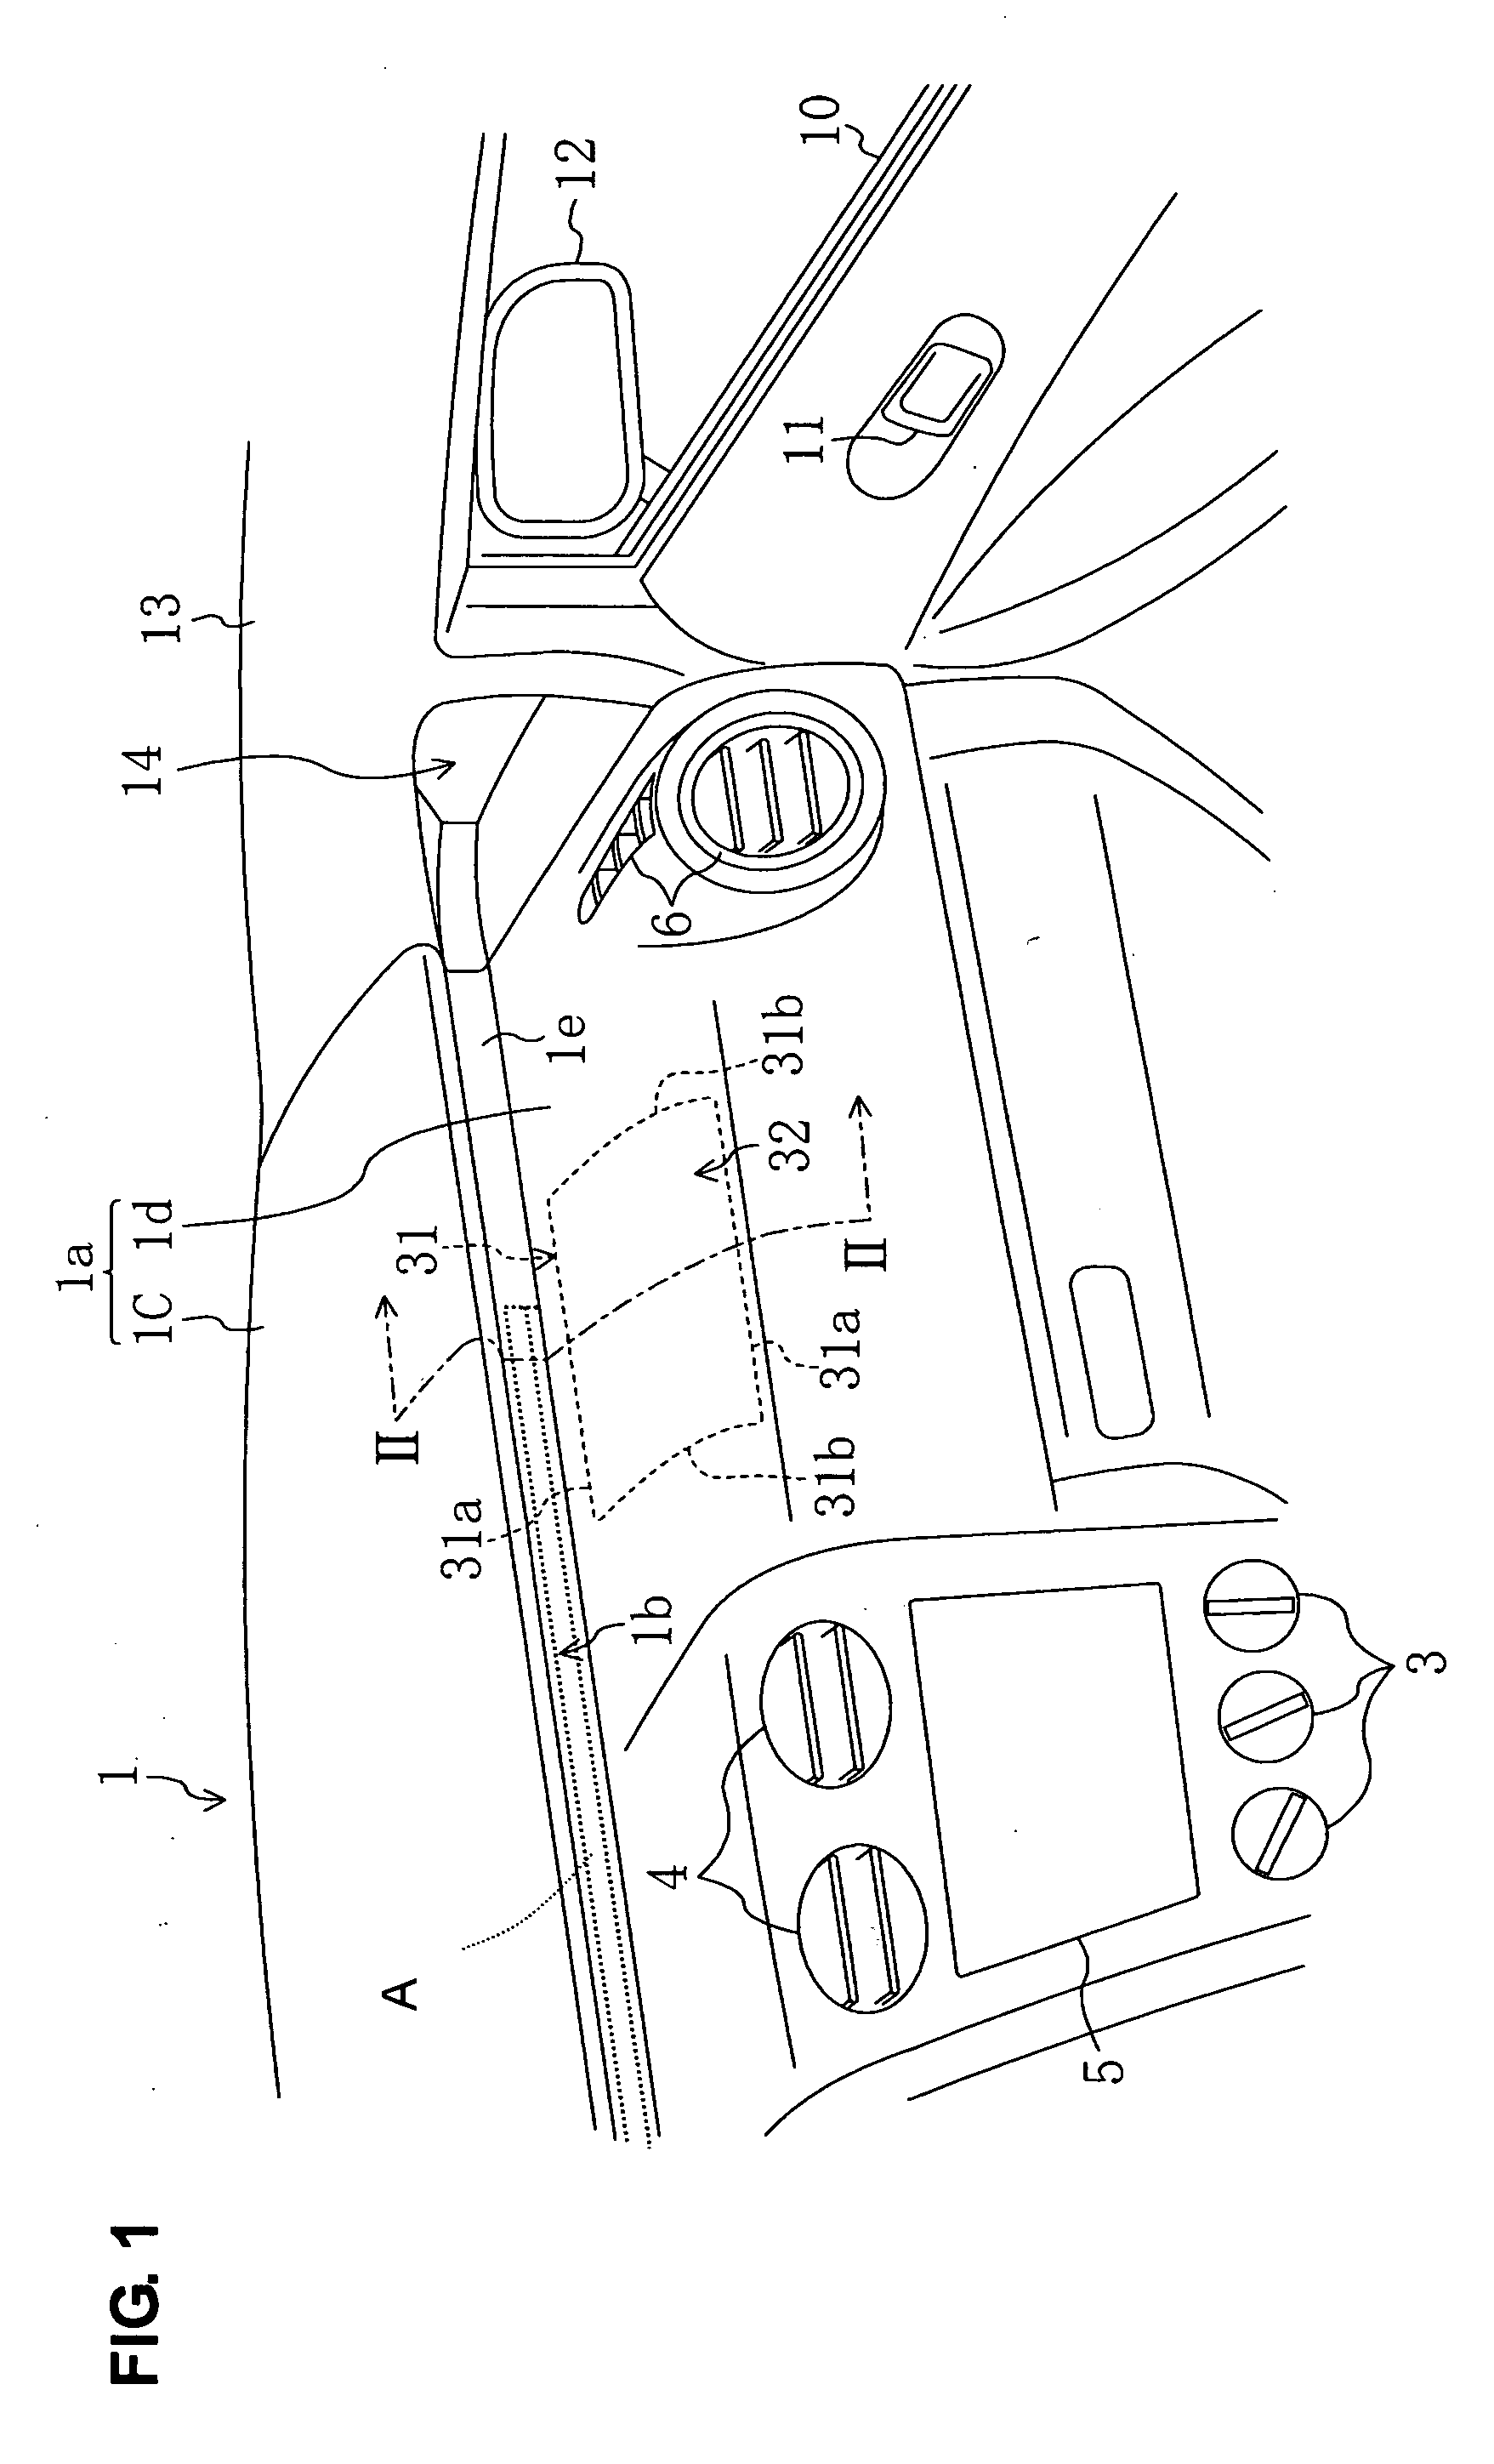 Instrument panel structure with airbag unit